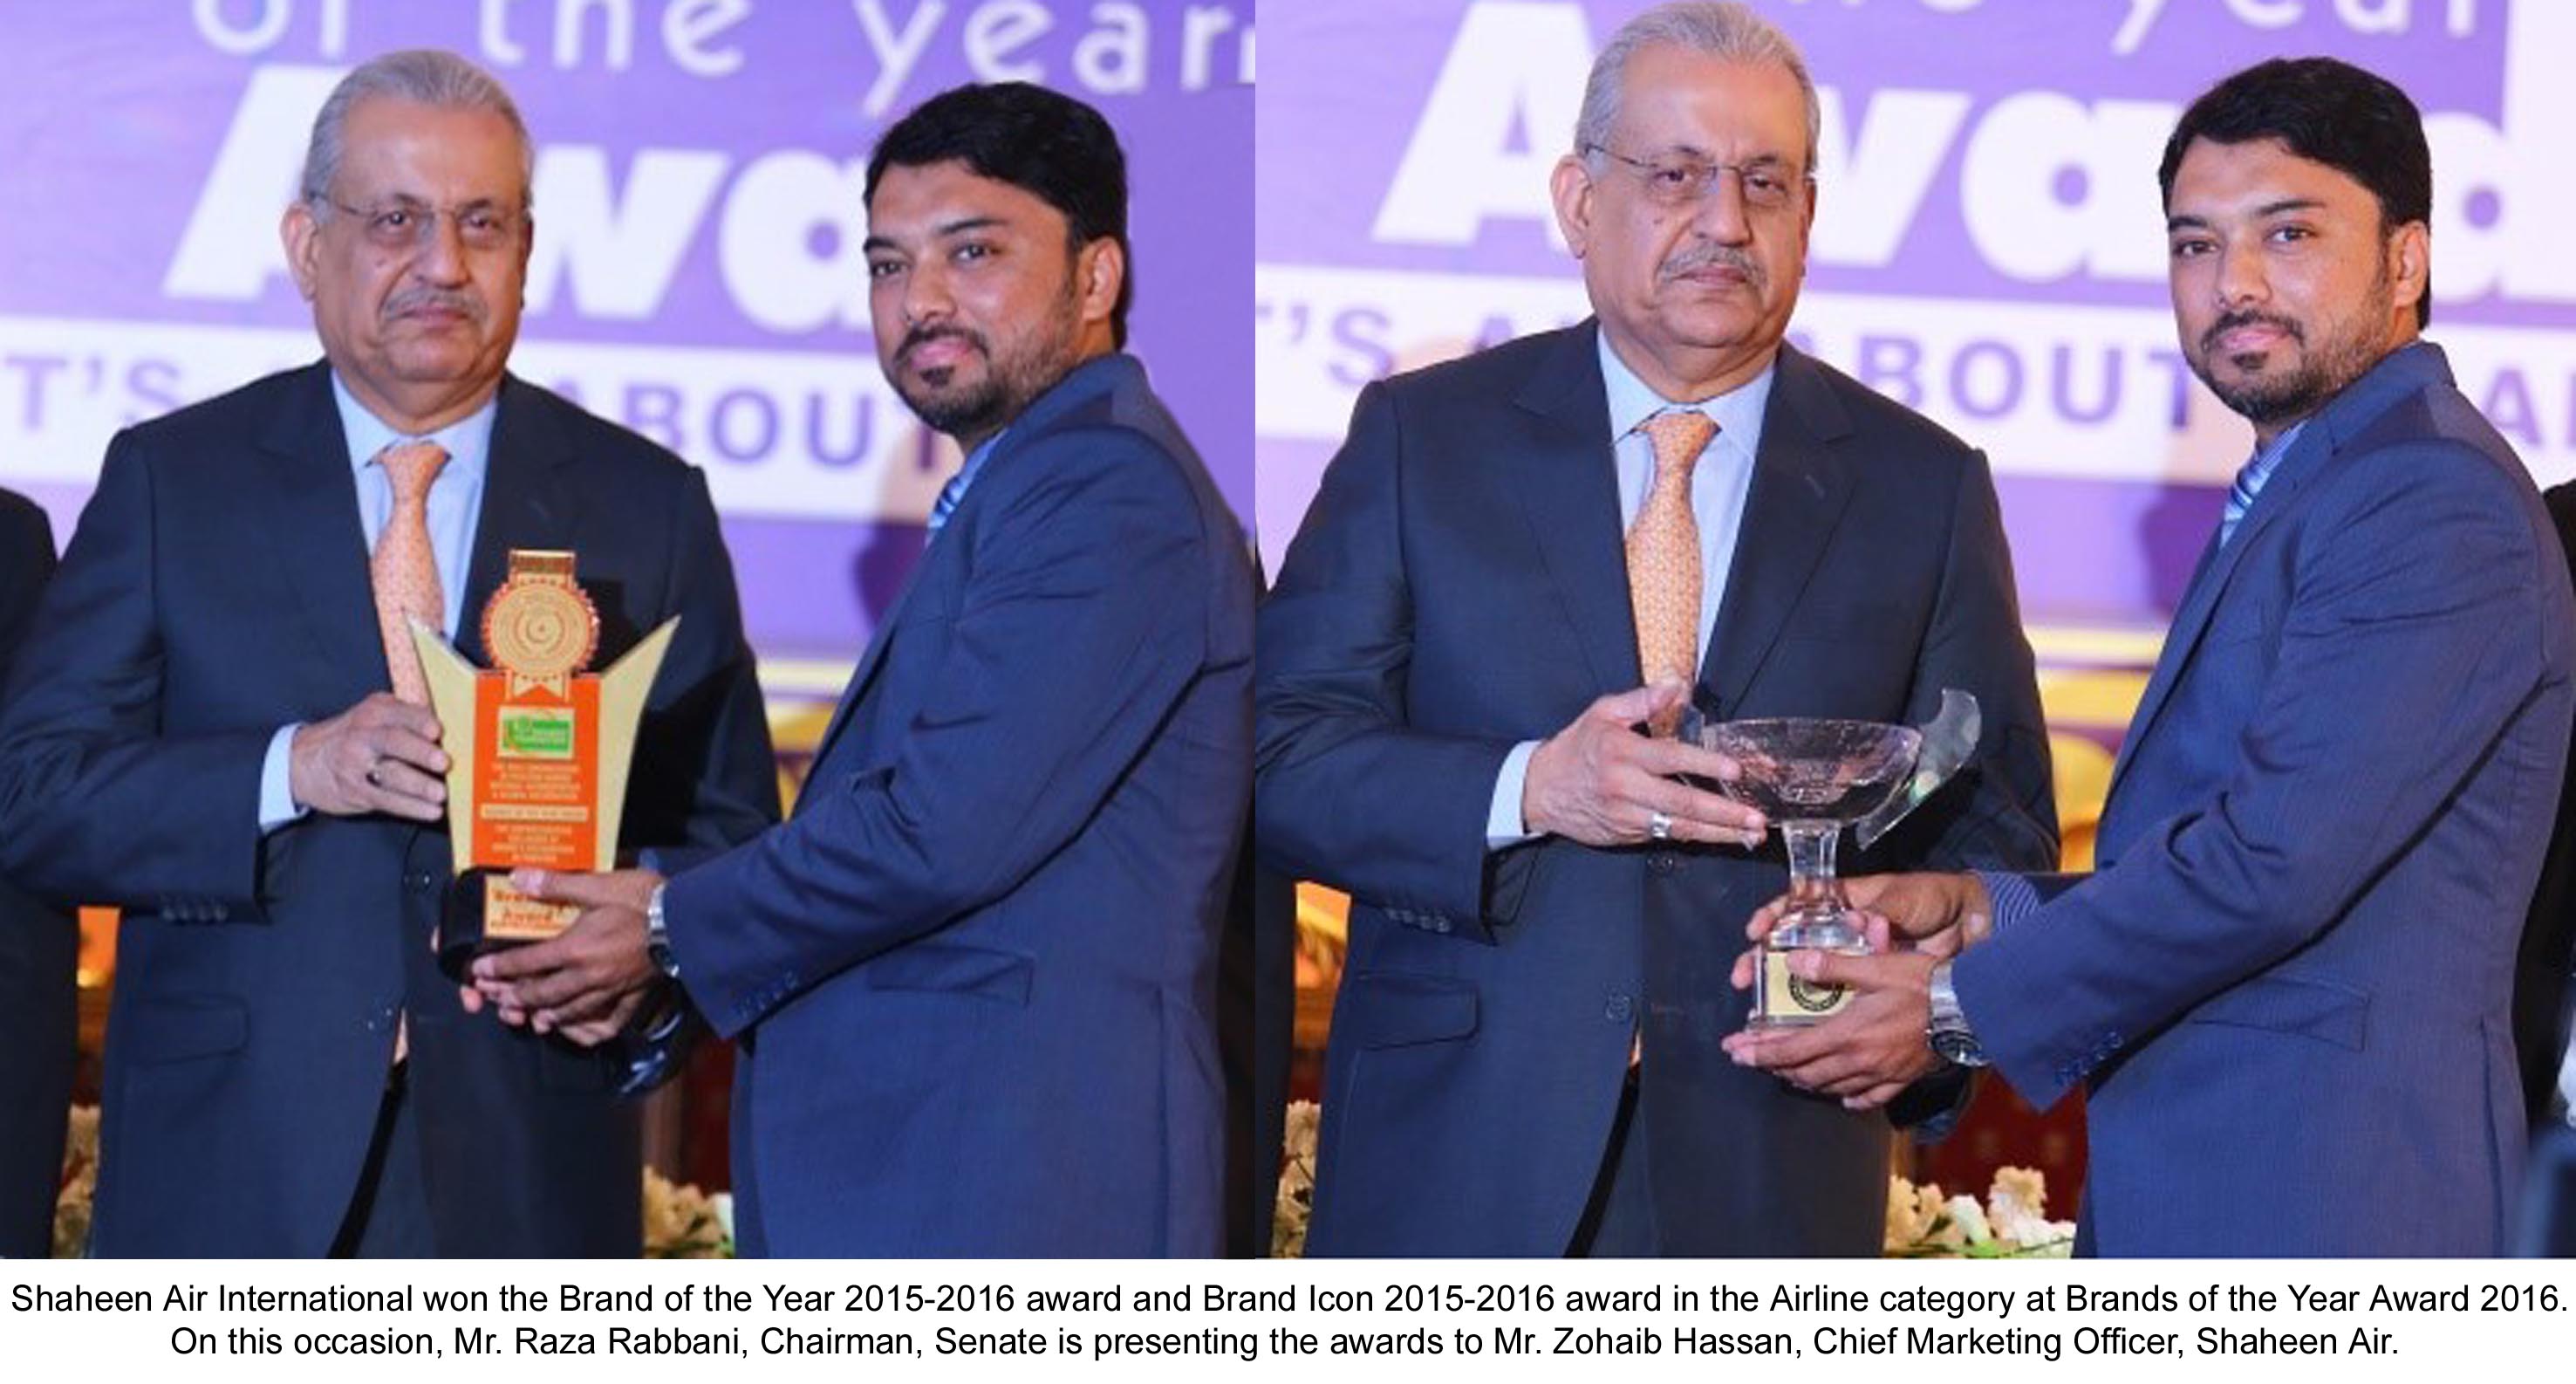 Shaheen Air International Grabs Two Top Accolades at Brands of the Year Award 2016